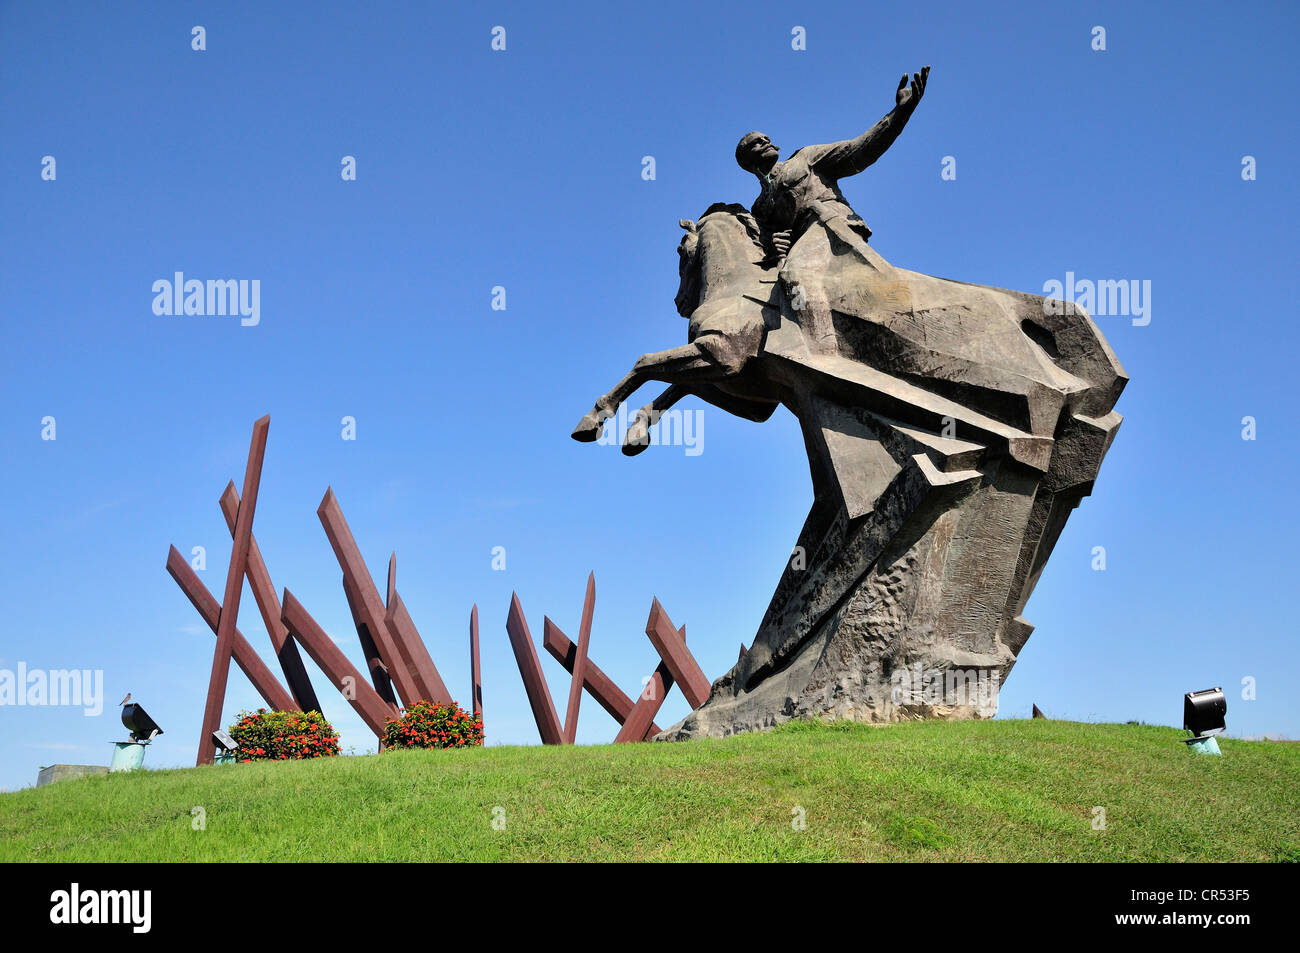 Equestrian revolution monument to Antonio Maceo Grajales, most important military leader of the Cuban guerrilla war against the Stock Photo